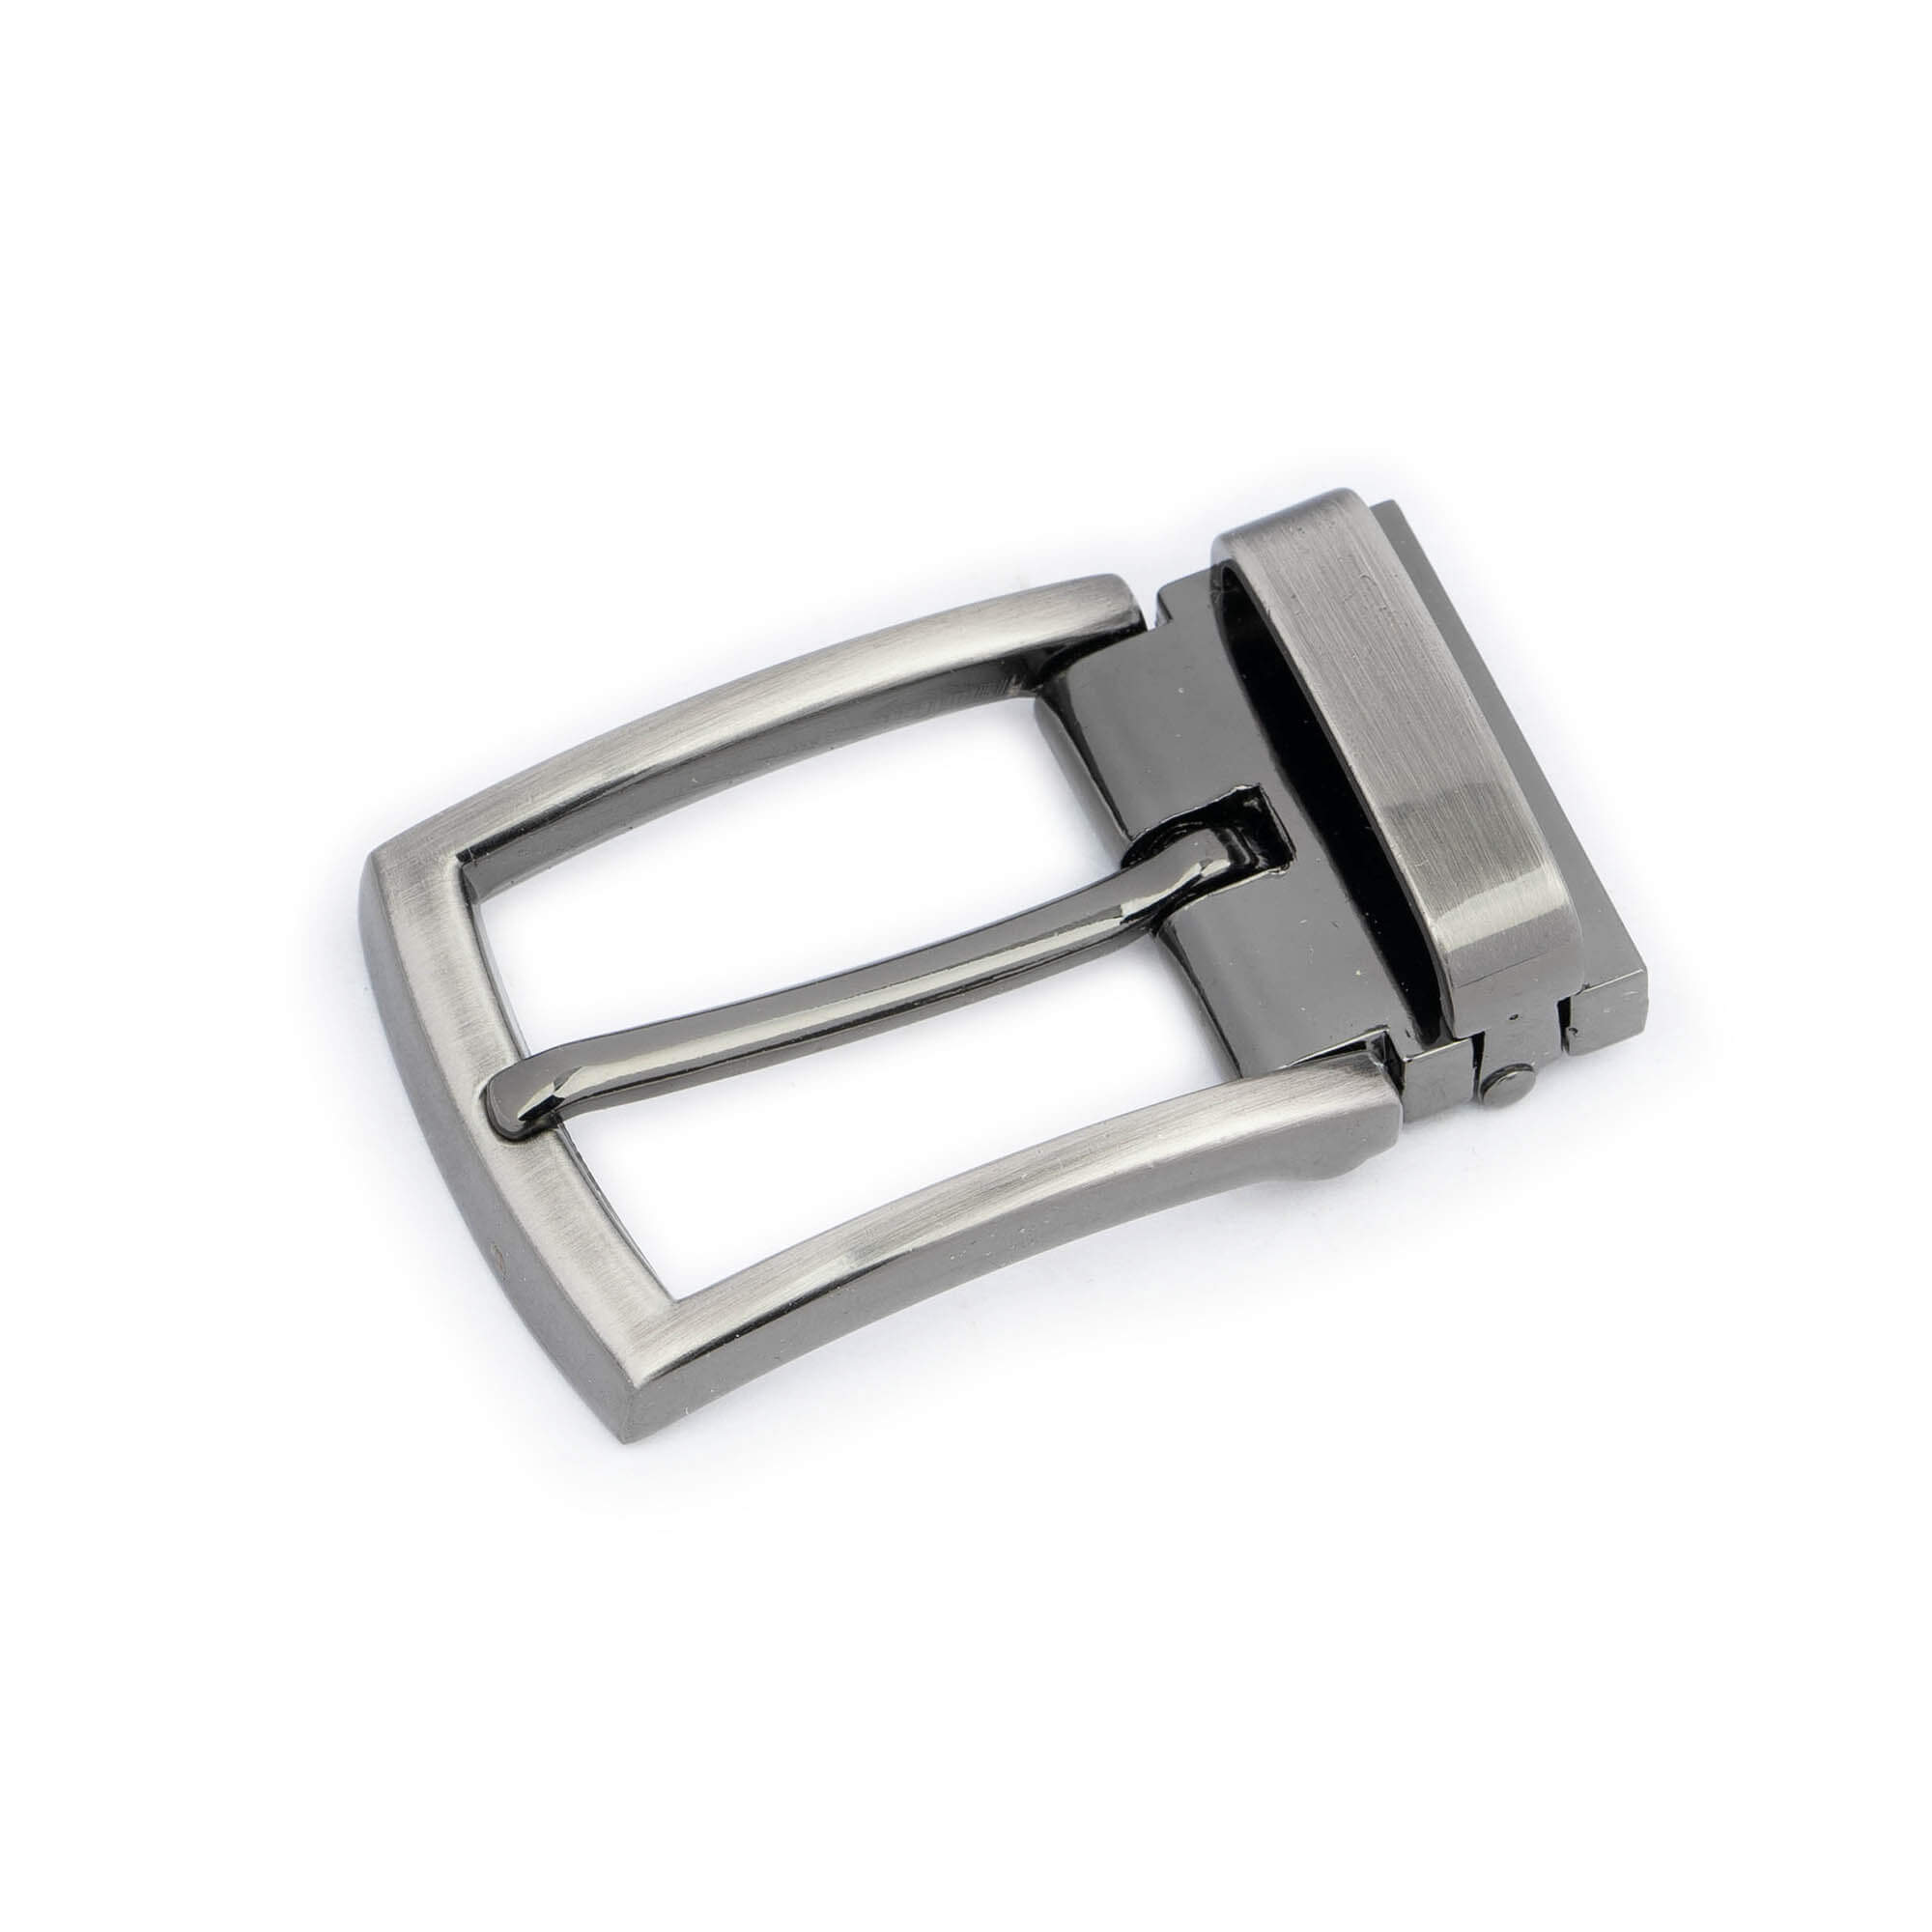 Clamp Belt Buckle Replacement 1 1/8 inch Gray